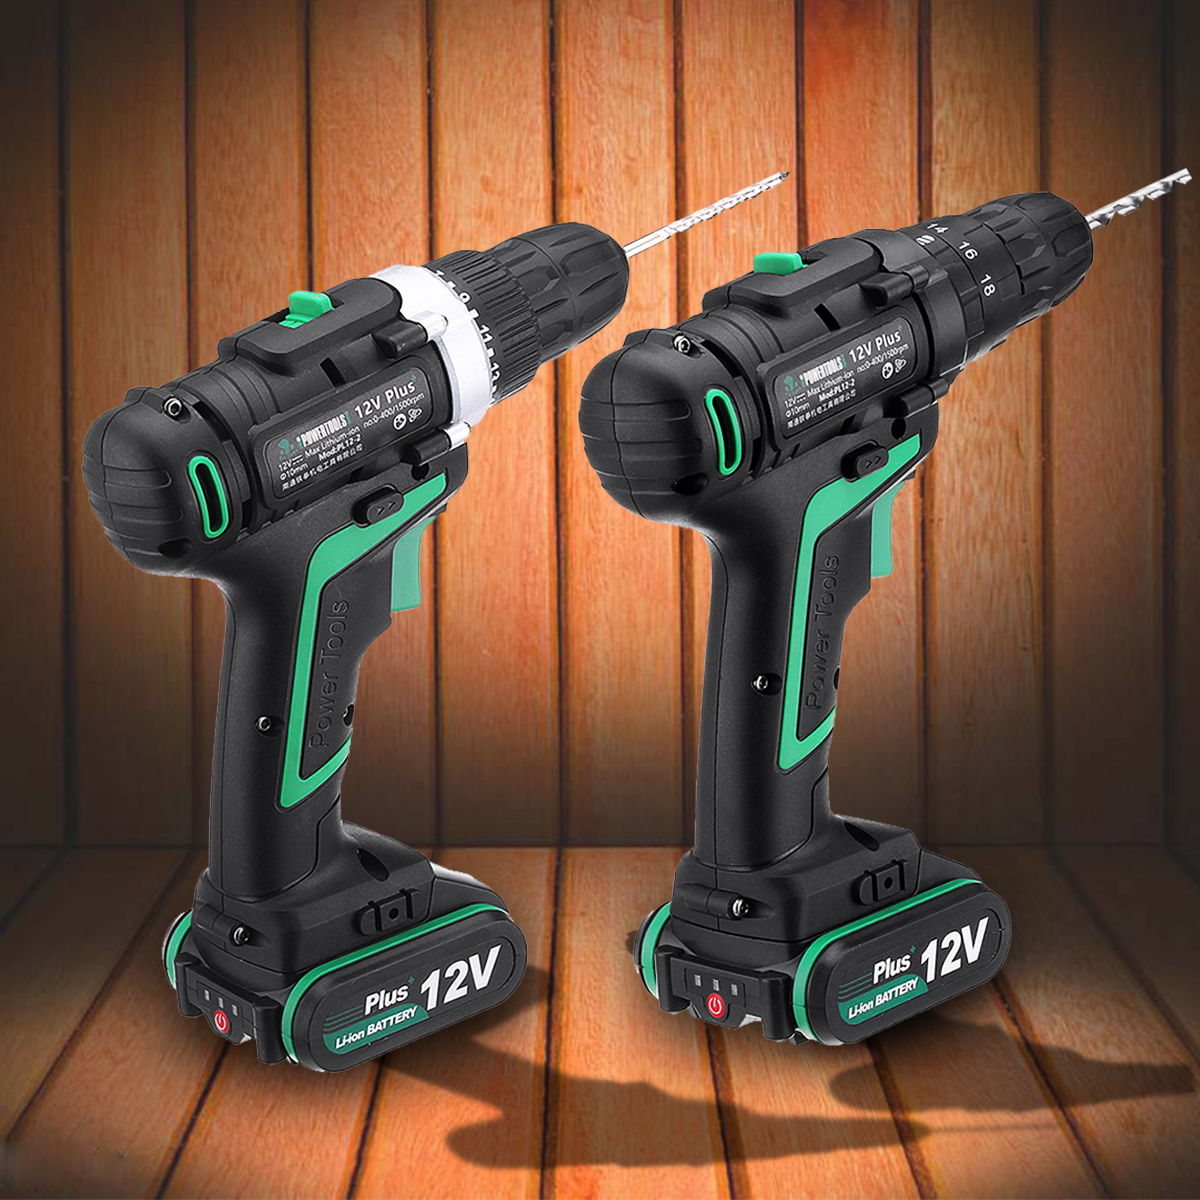 AC100-240V-Electric-Screwdriver-Cordless-Power-Drill-Tools-Dual-Speed-Impact-With-Accessories-1285297-3